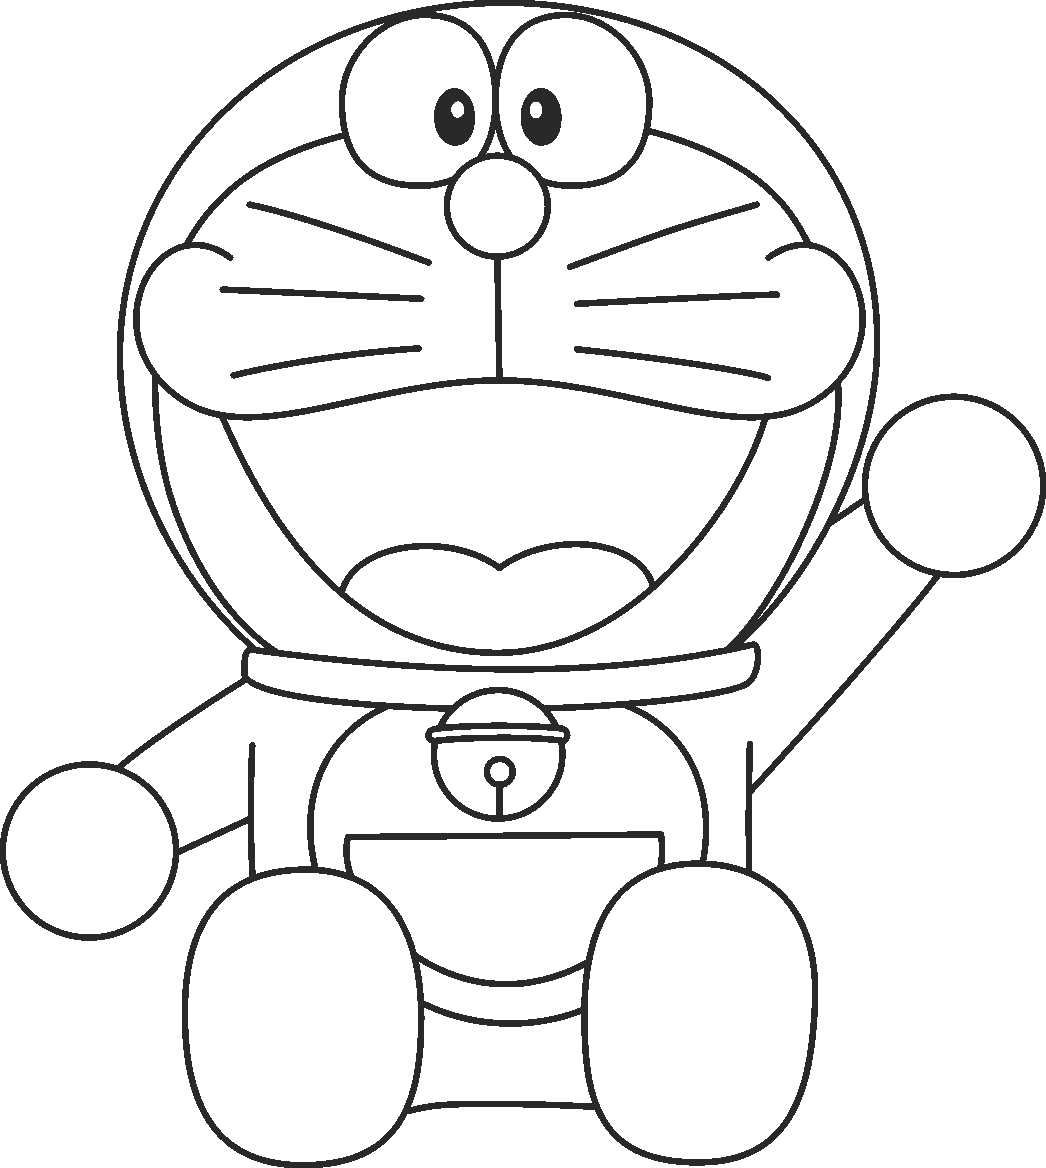 Drawing Doraemon Characters for Kids: Drawing Doraemon Characters For Kids  : The Step By Step, Easy Guide For Kids To Drawing 17 Cute Doraemon  Characters Using Basic Shapes And Lines. (Series #1) (